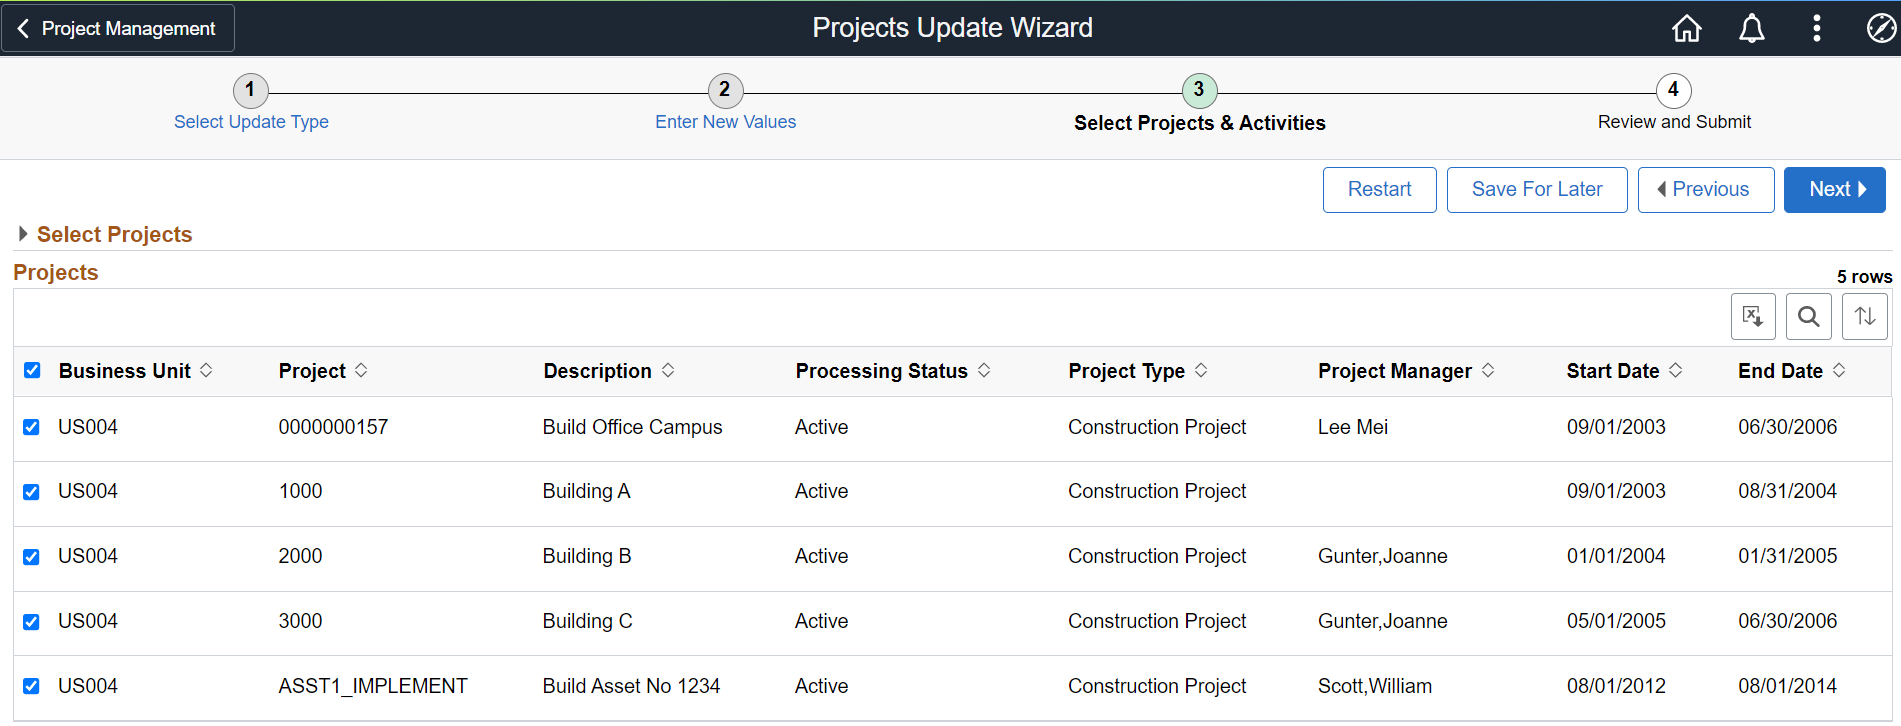 Project Update Wizard - Select Projects Activities page